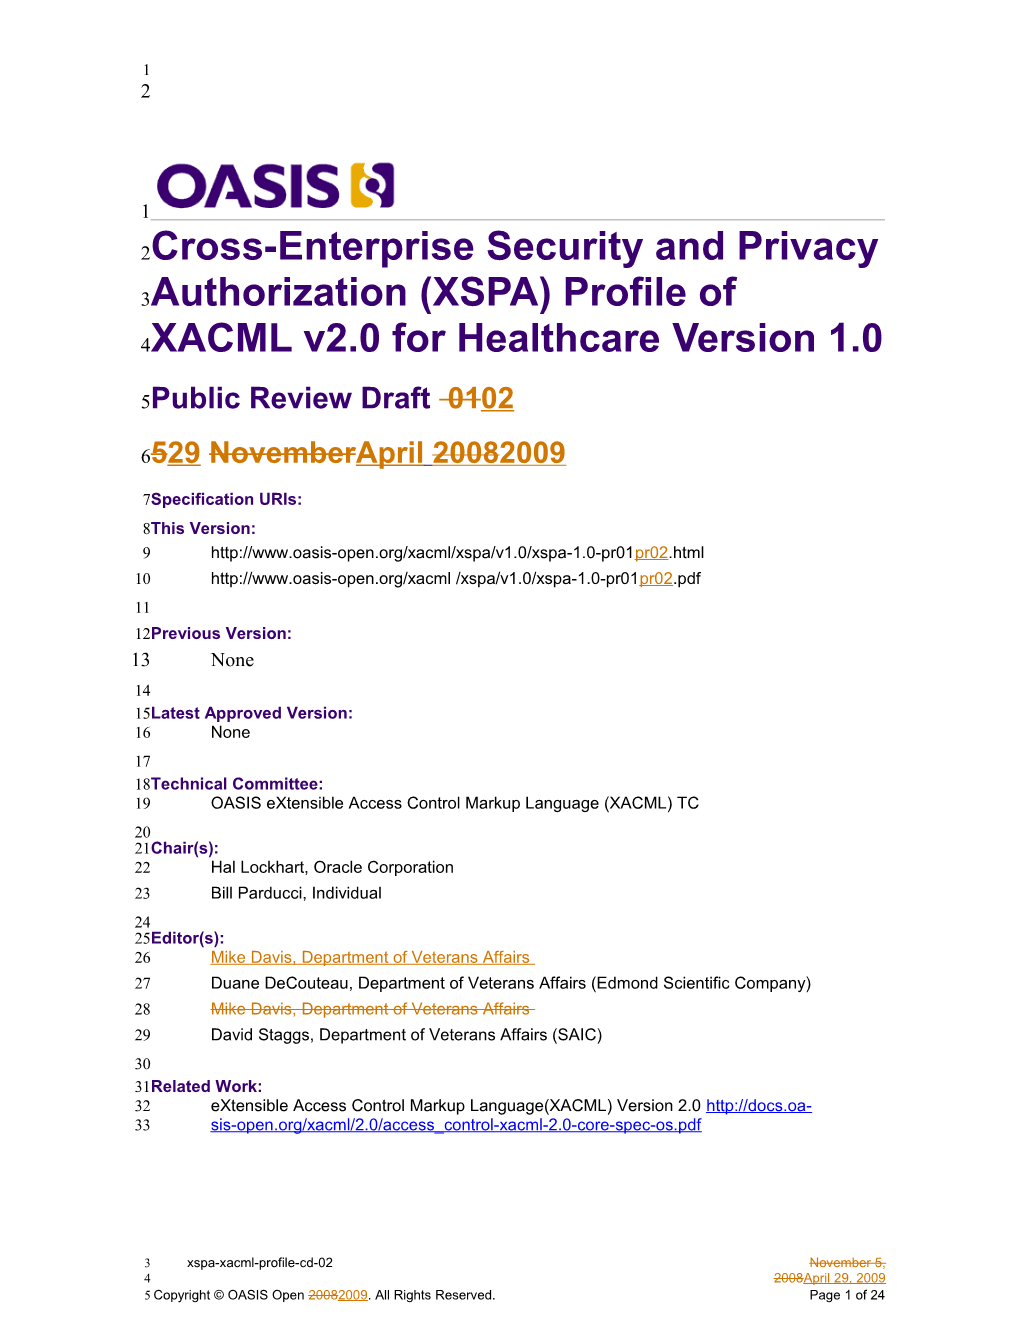 Cross-Enterprise Security and Privacy Authorization (XSPA) Profile of XACML V2.0 for Healthcare